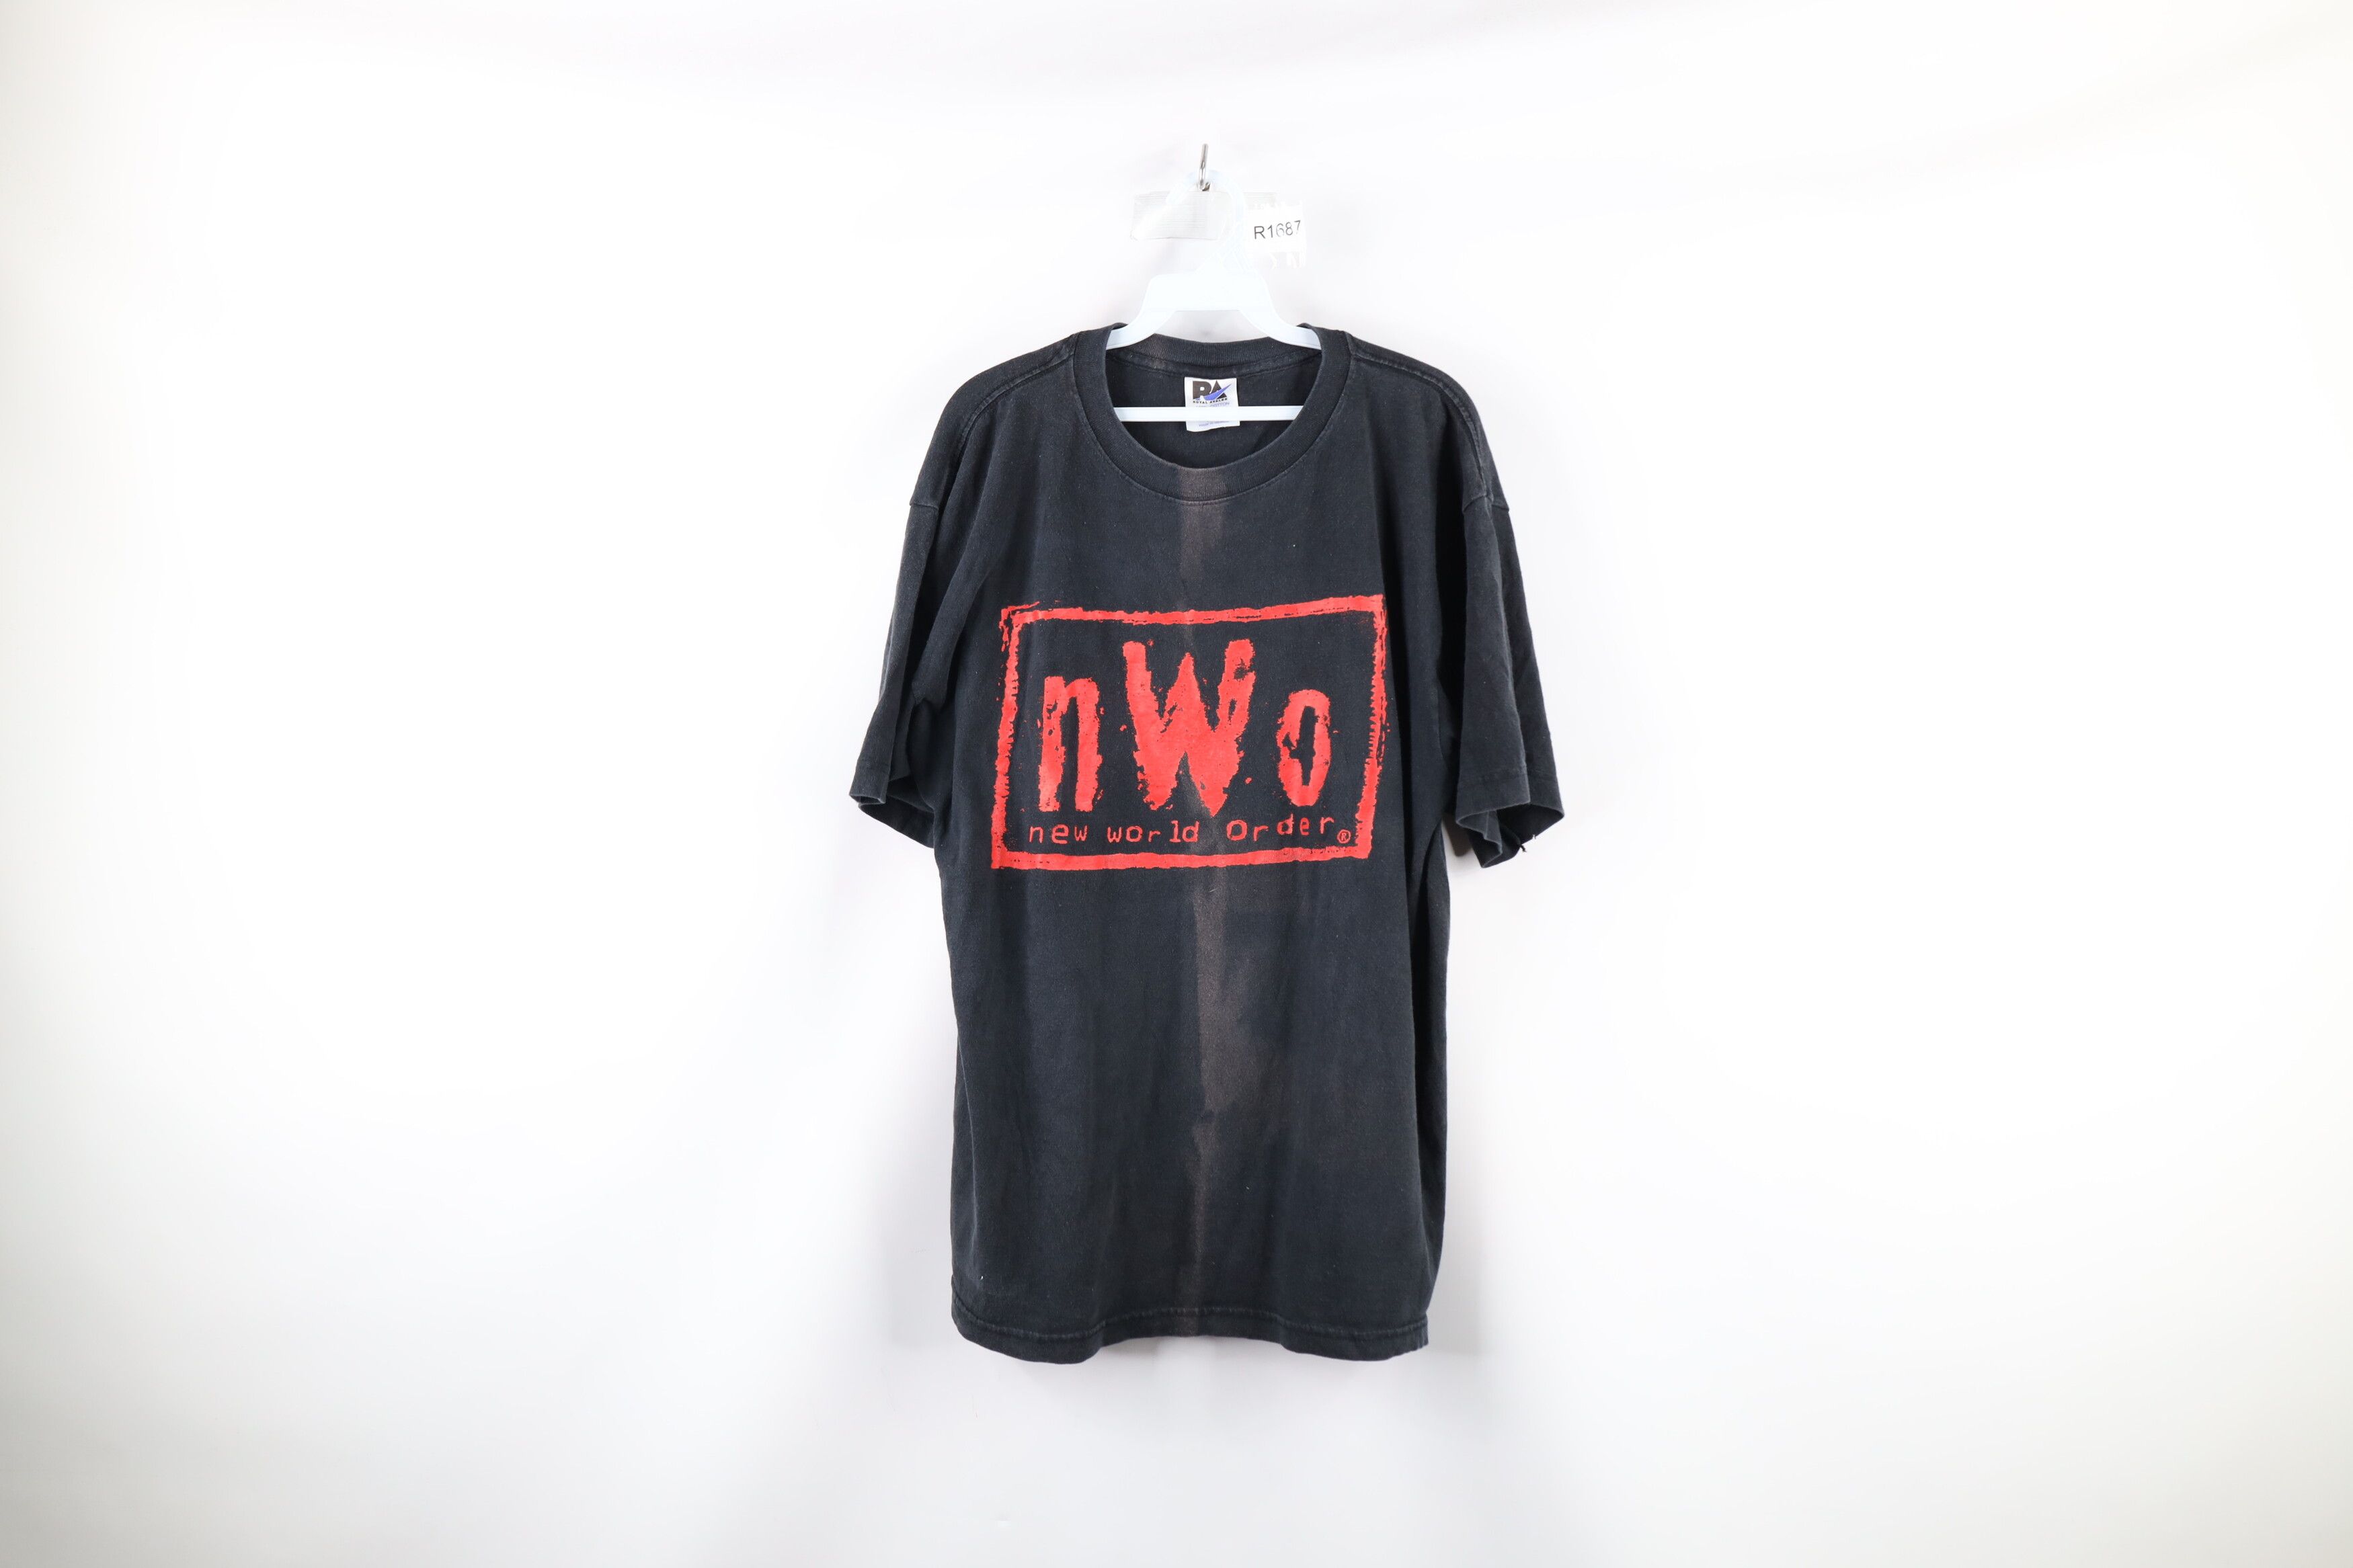 Vintage Vintage 90s WCW Out NWO New World Order Wrestling T-Shirt Size US XL / EU 56 / 4 - 1 Preview